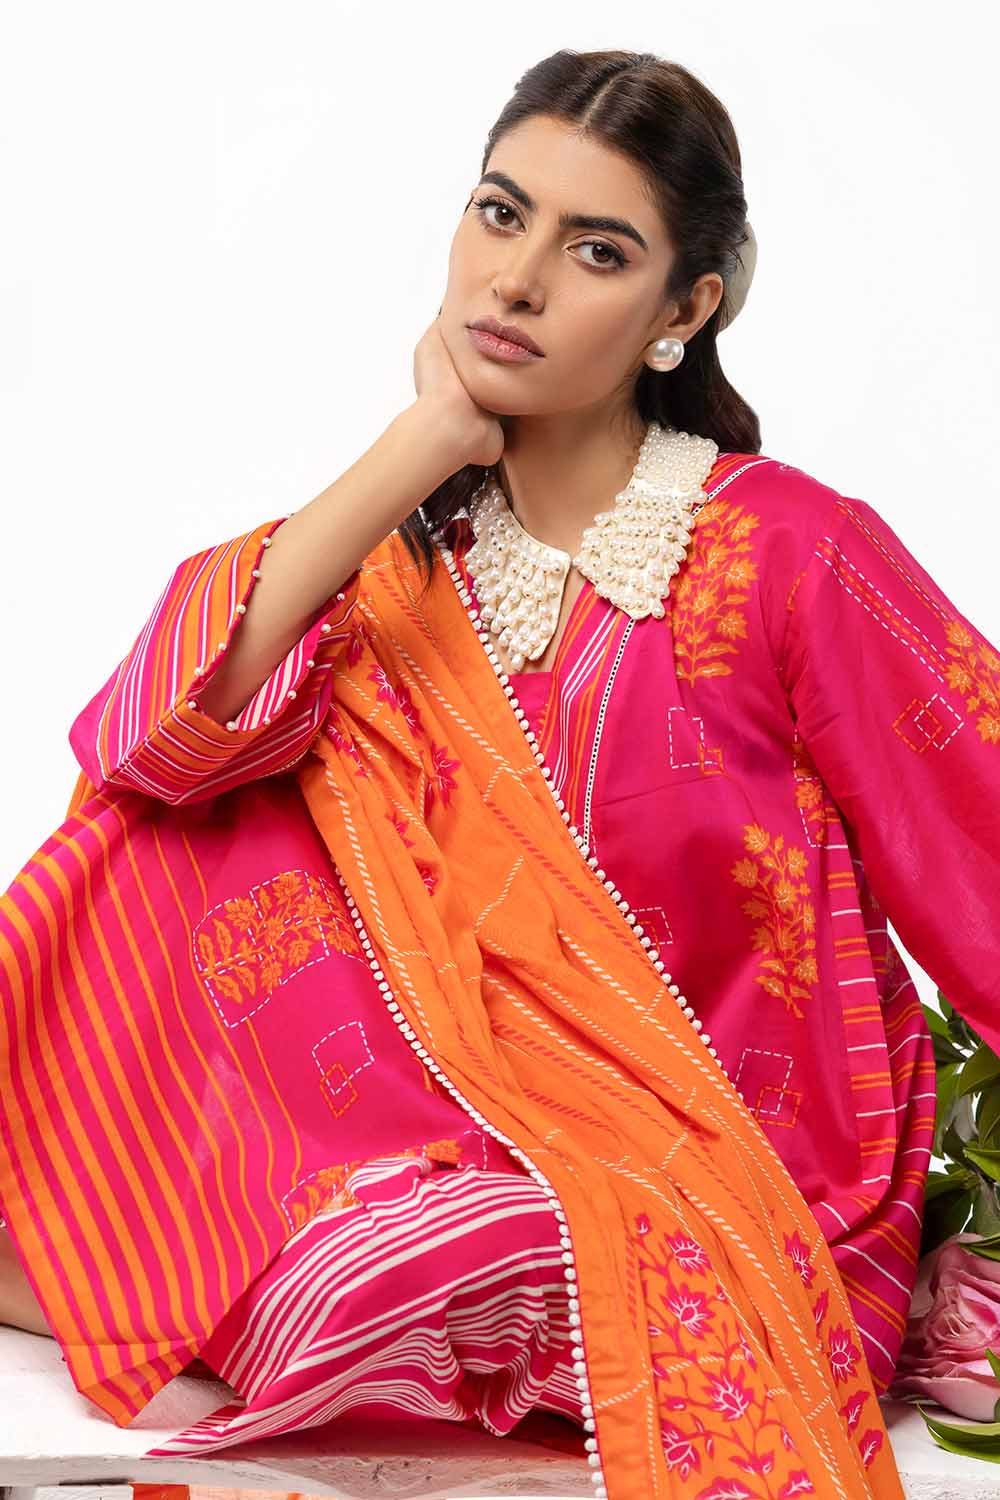 Gul Ahmed 3PC Lawn Printed Unstitched Suit CL-32452